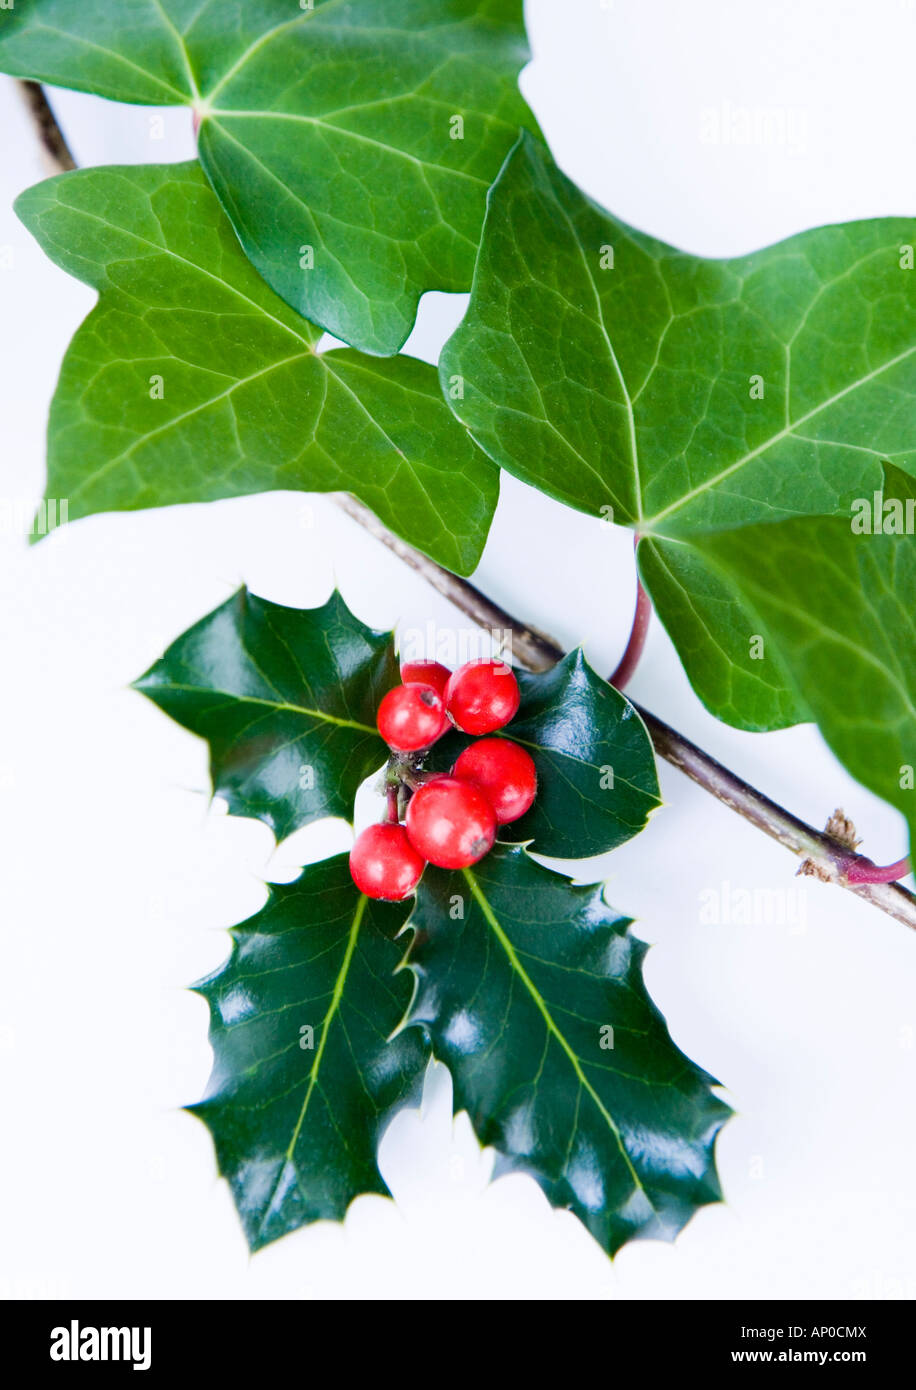 A sprig of holly leaves and red berries against an ivy vine on white background Stock Photo